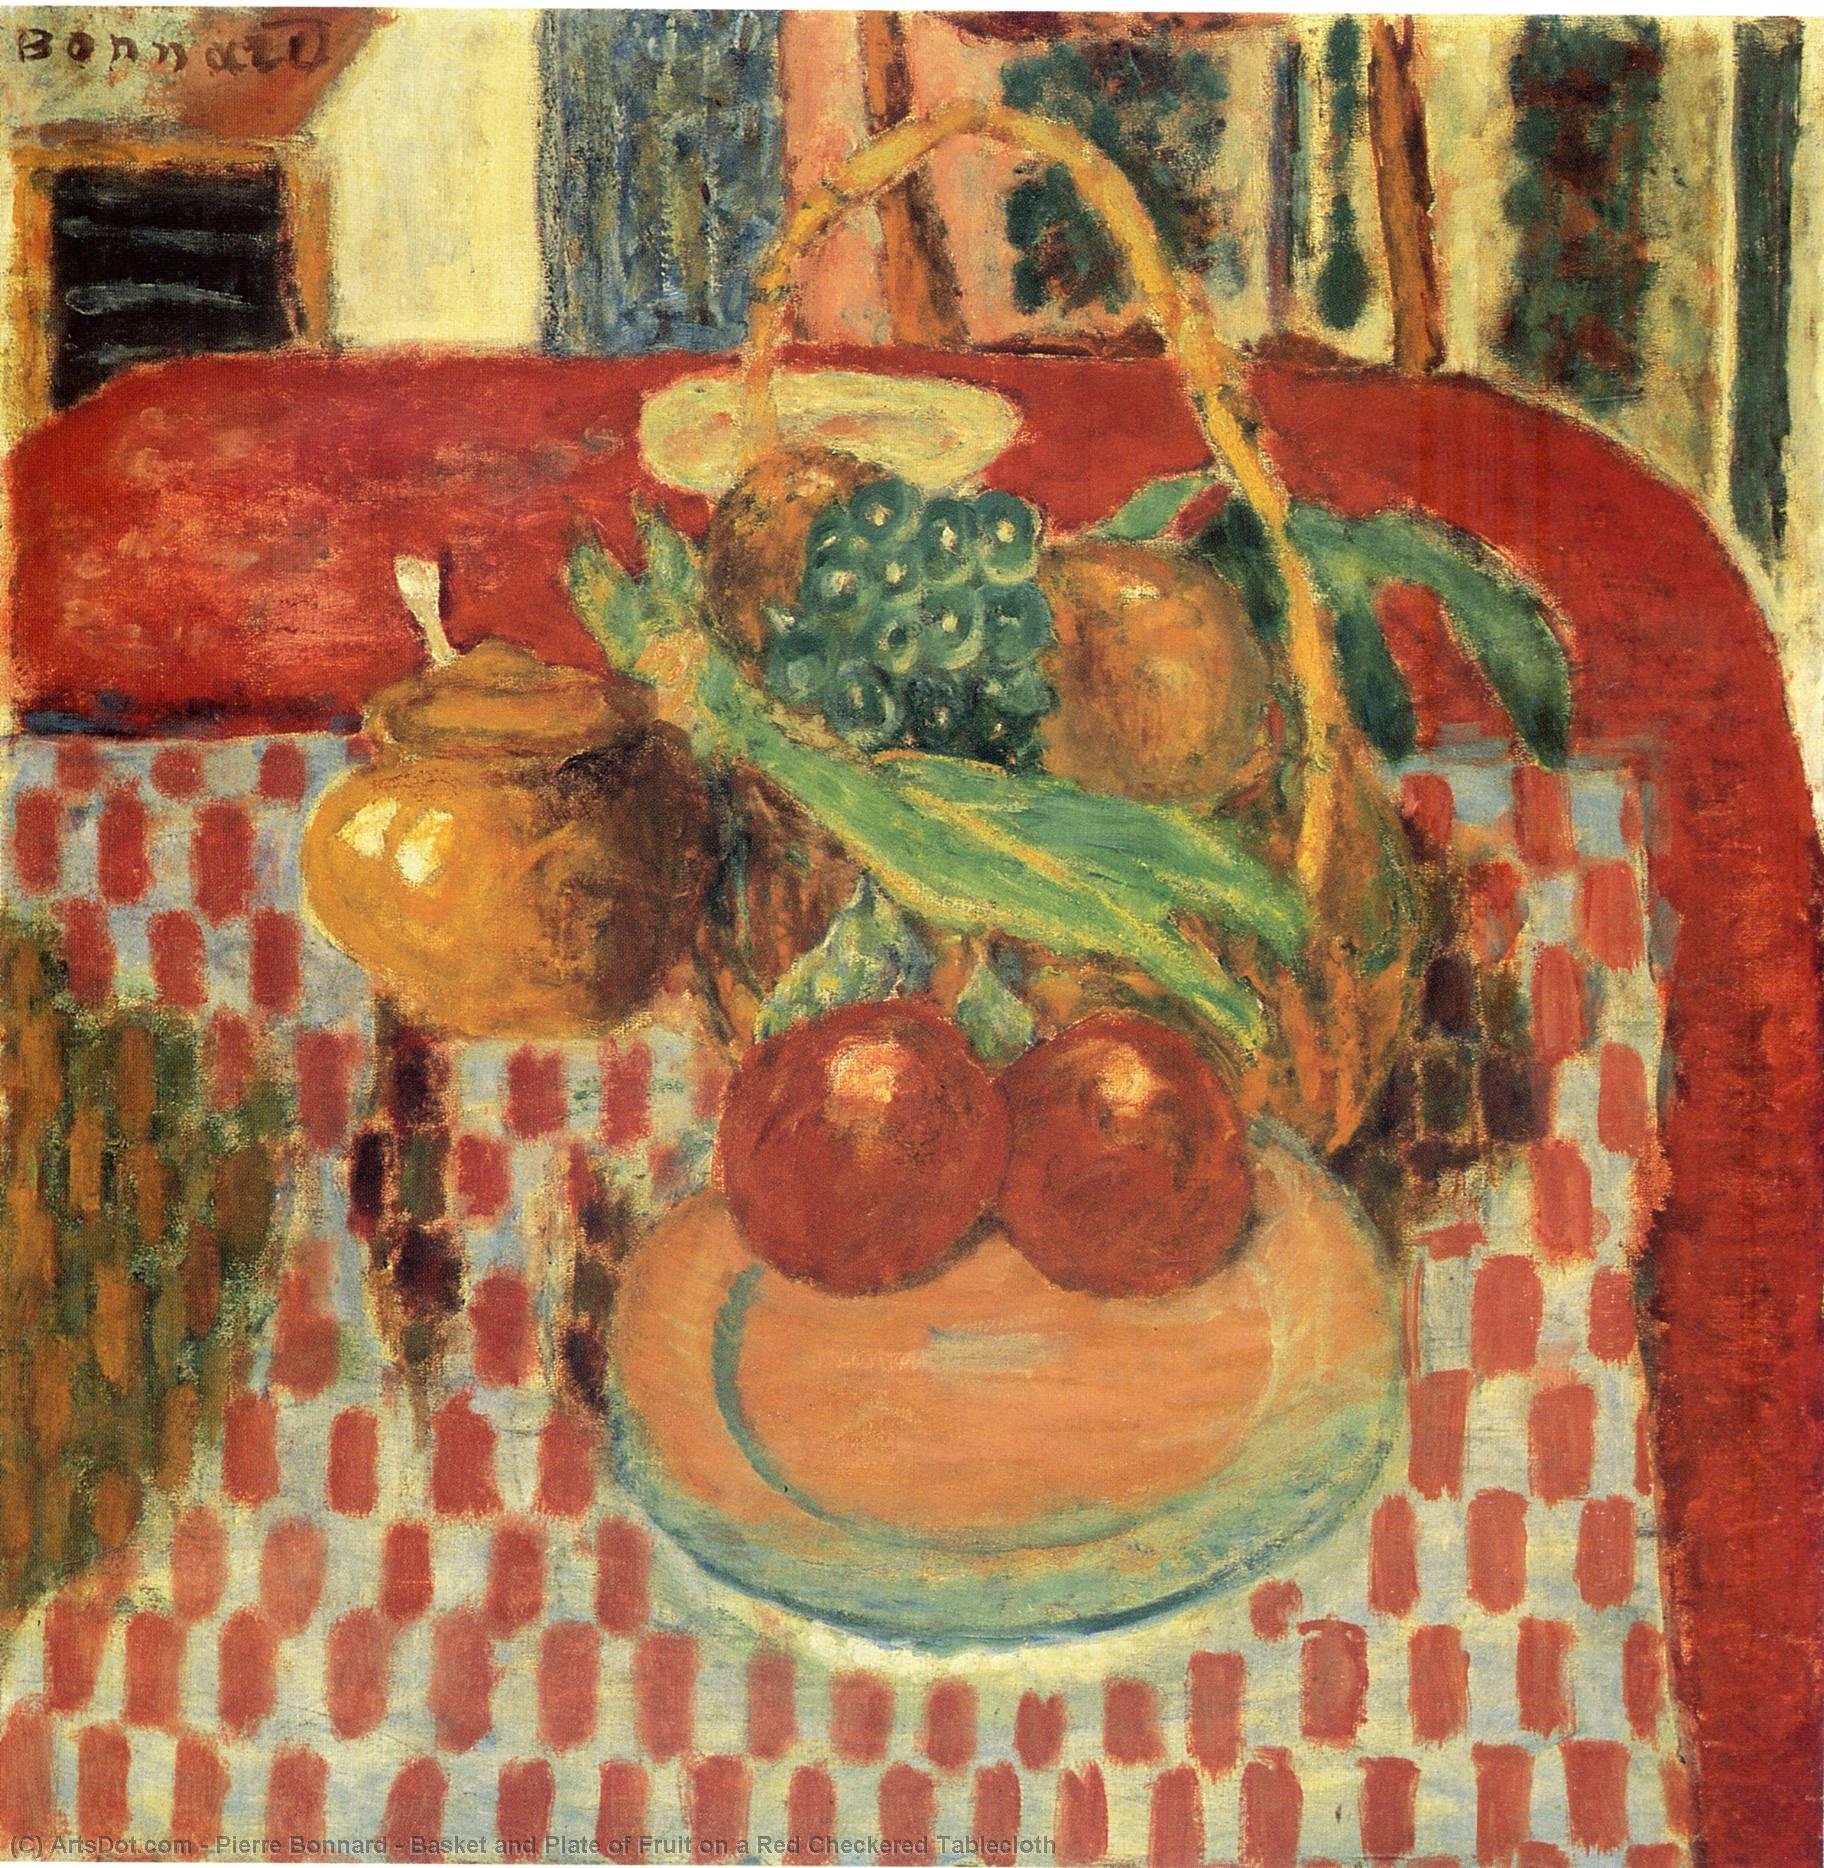 Order Art Reproductions Basket and Plate of Fruit on a Red Checkered Tablecloth, 1939 by Pierre Bonnard (1867-1947, France) | ArtsDot.com